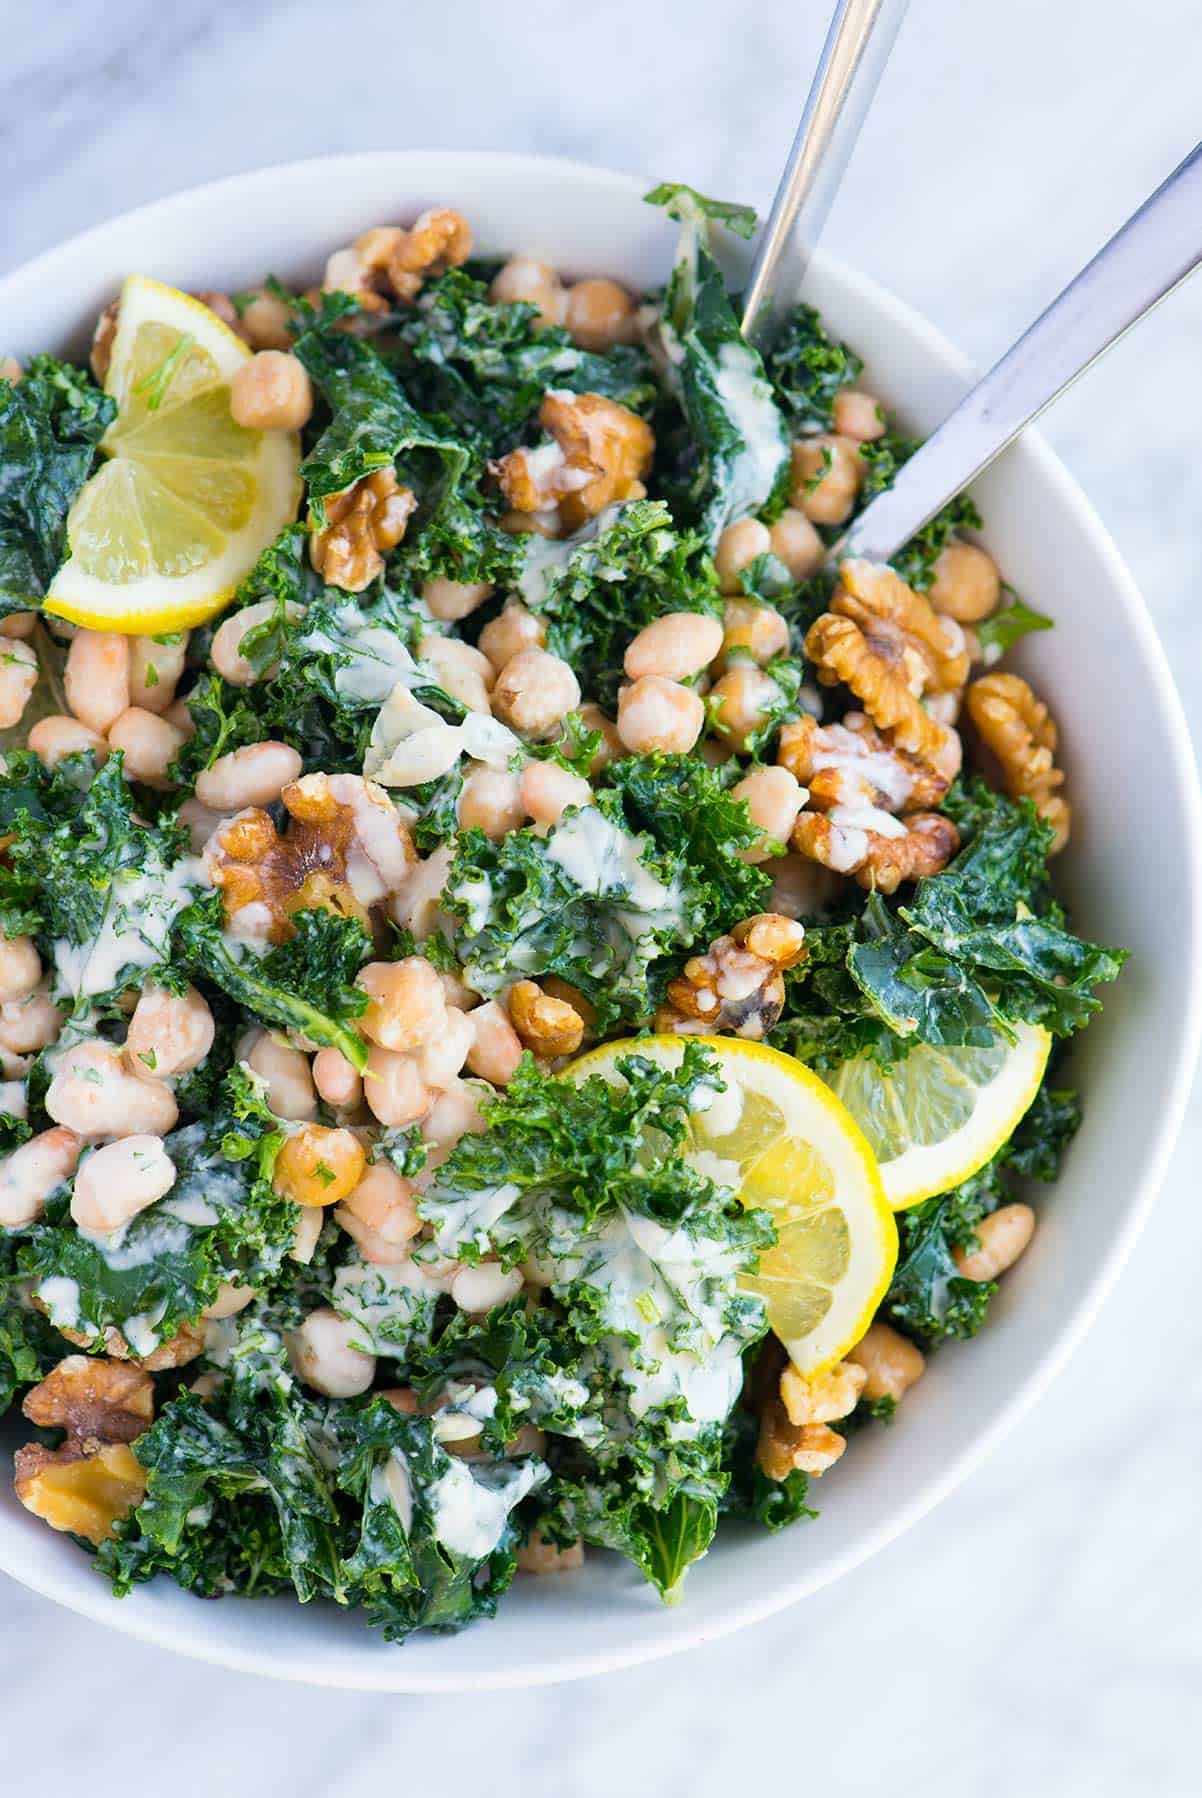 This hearty kale and bean salad is packed with good for you ingredients, is practically crave-worthy and can be made in advance.